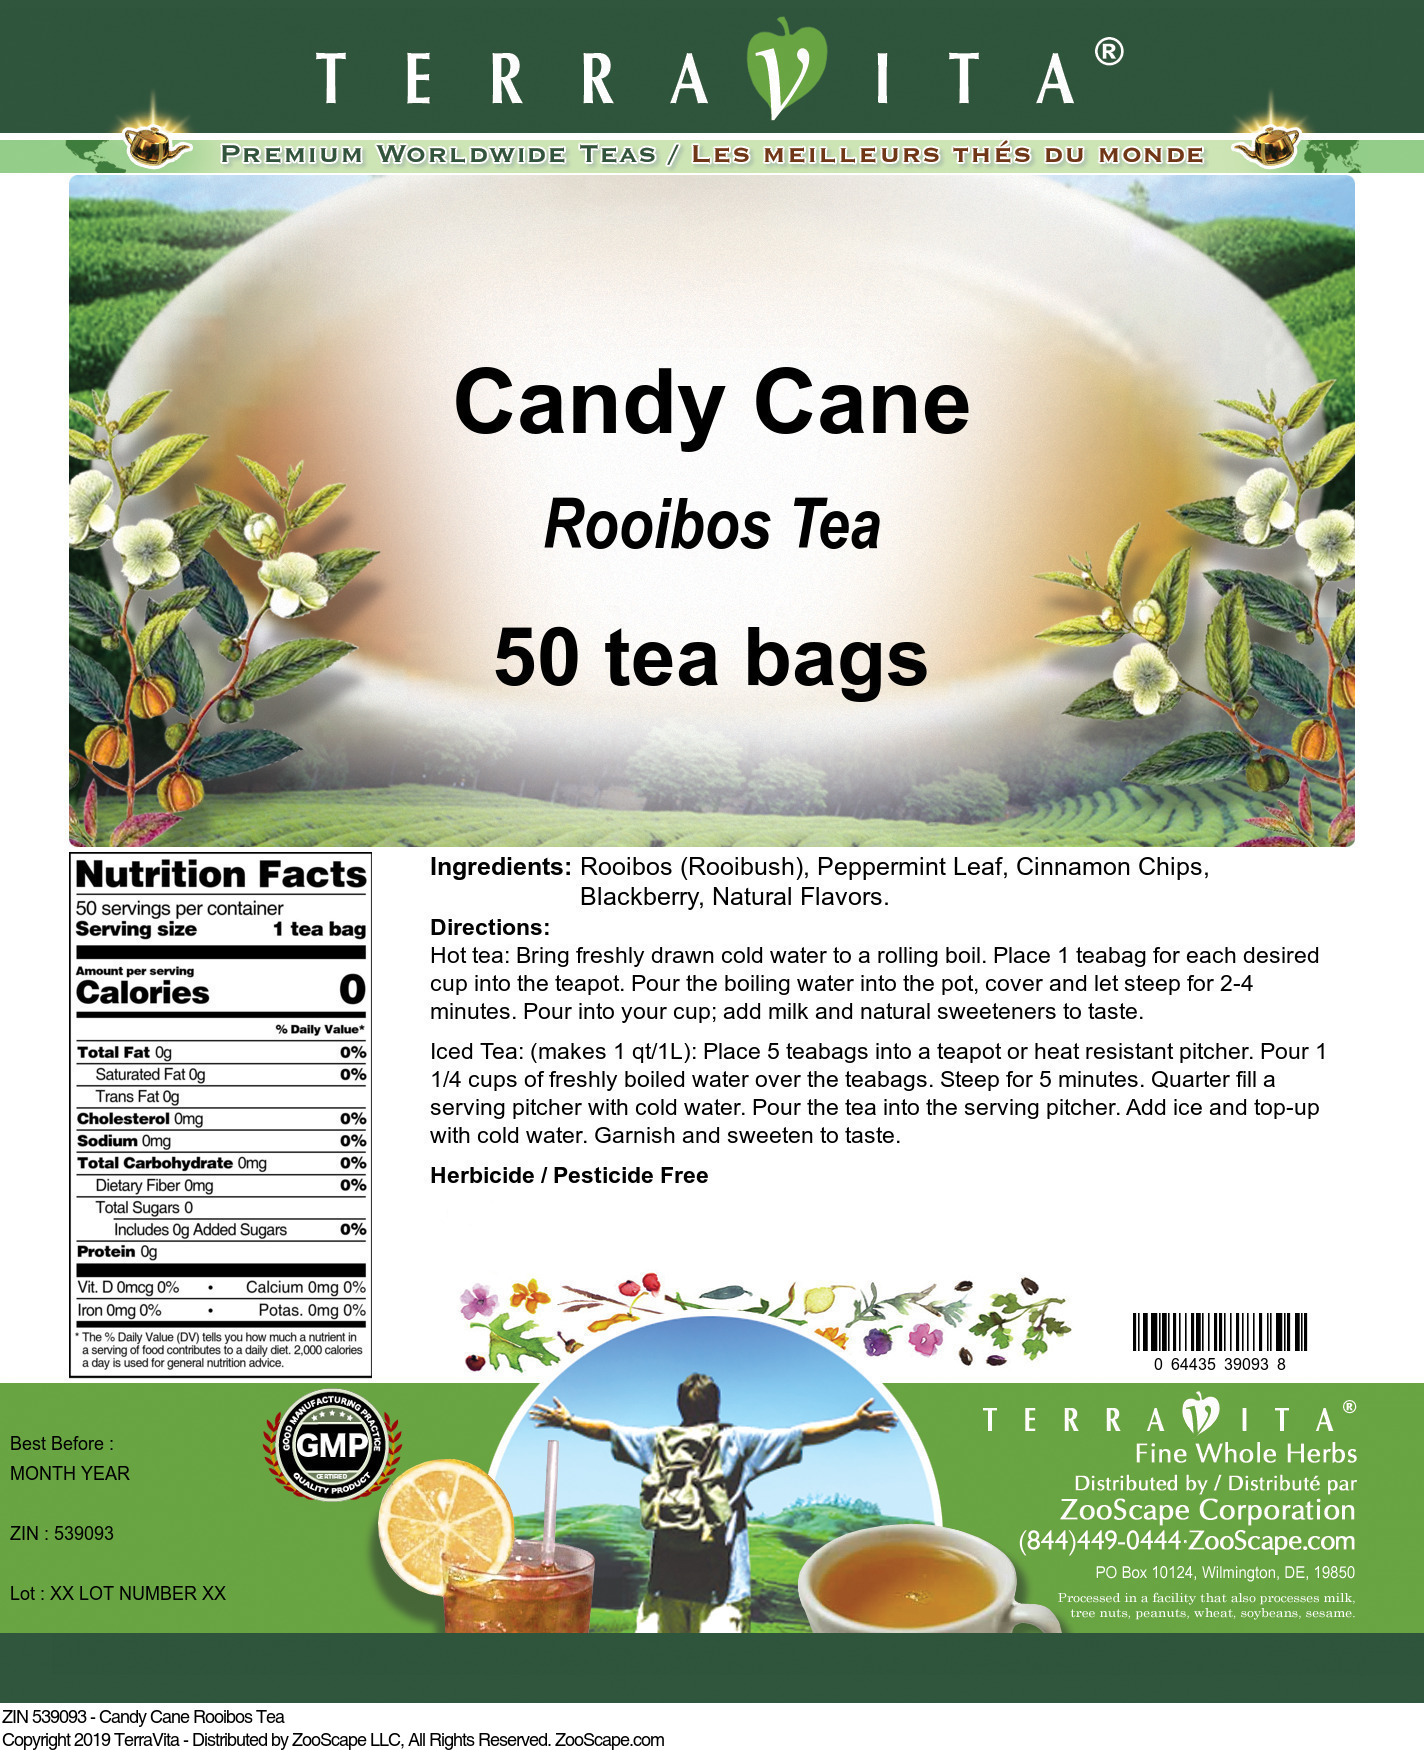 Candy Cane Rooibos Tea - Label